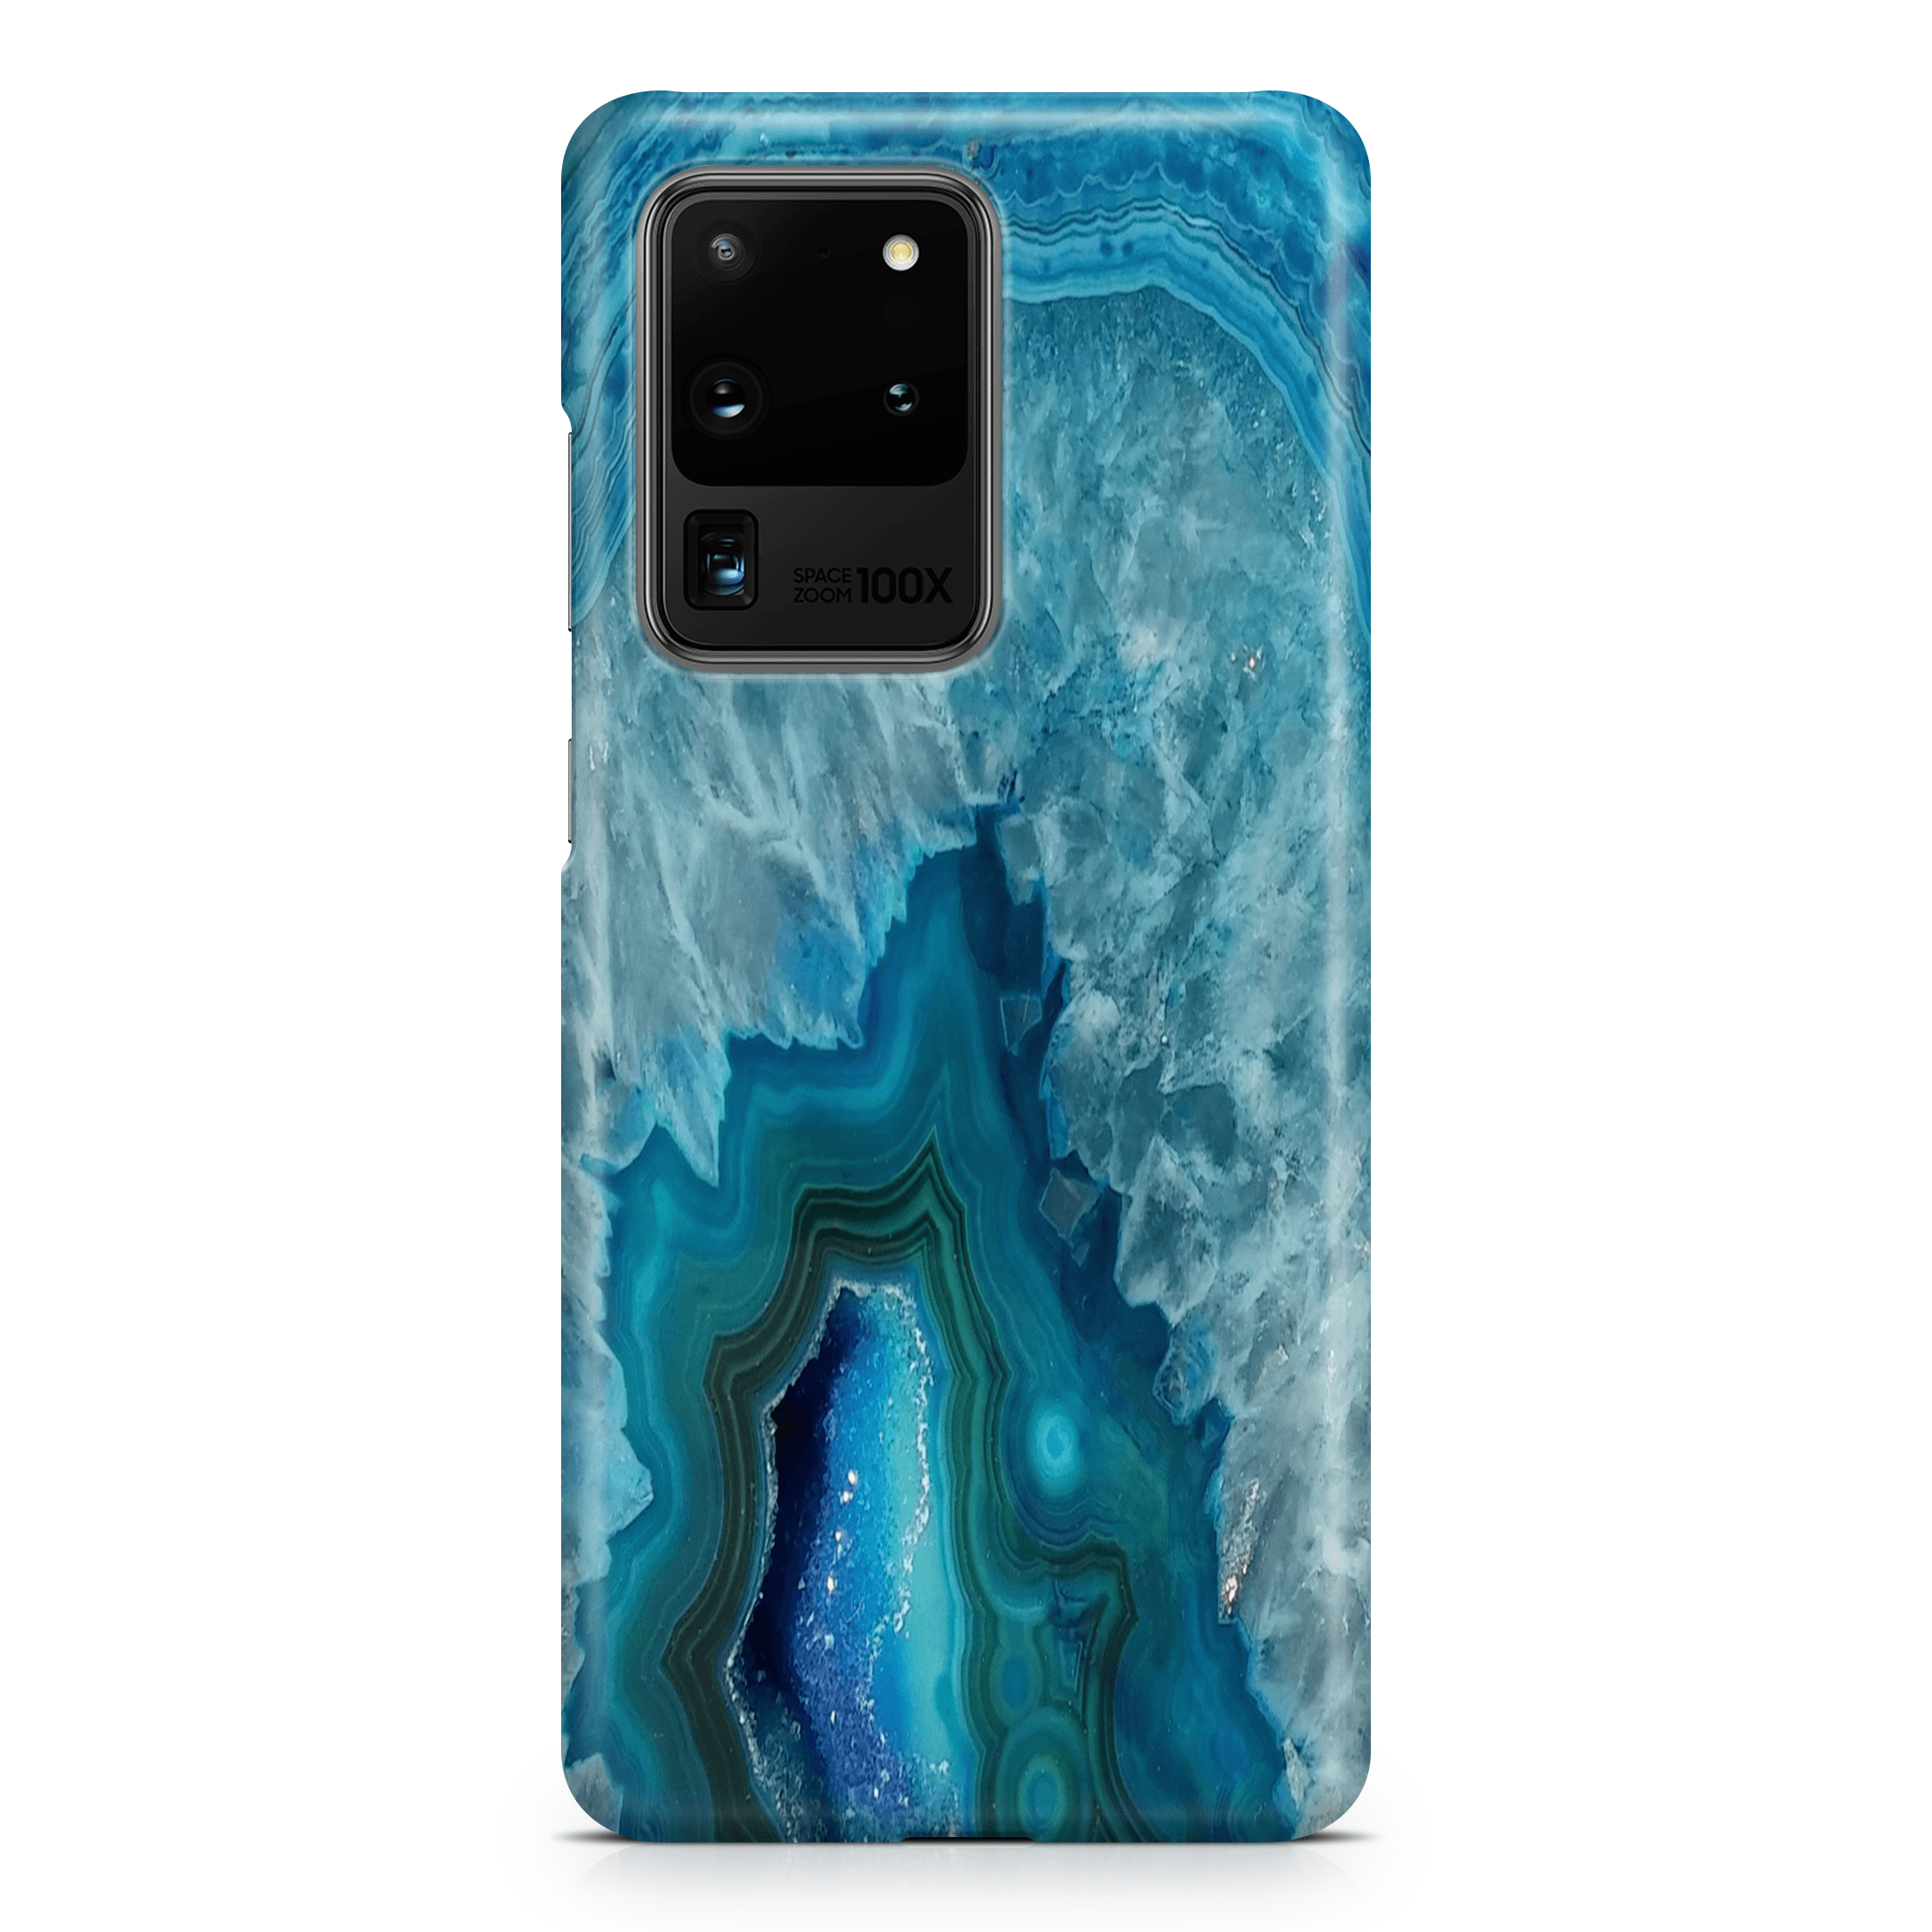 Blue Geode II - Samsung phone case designs by CaseSwagger